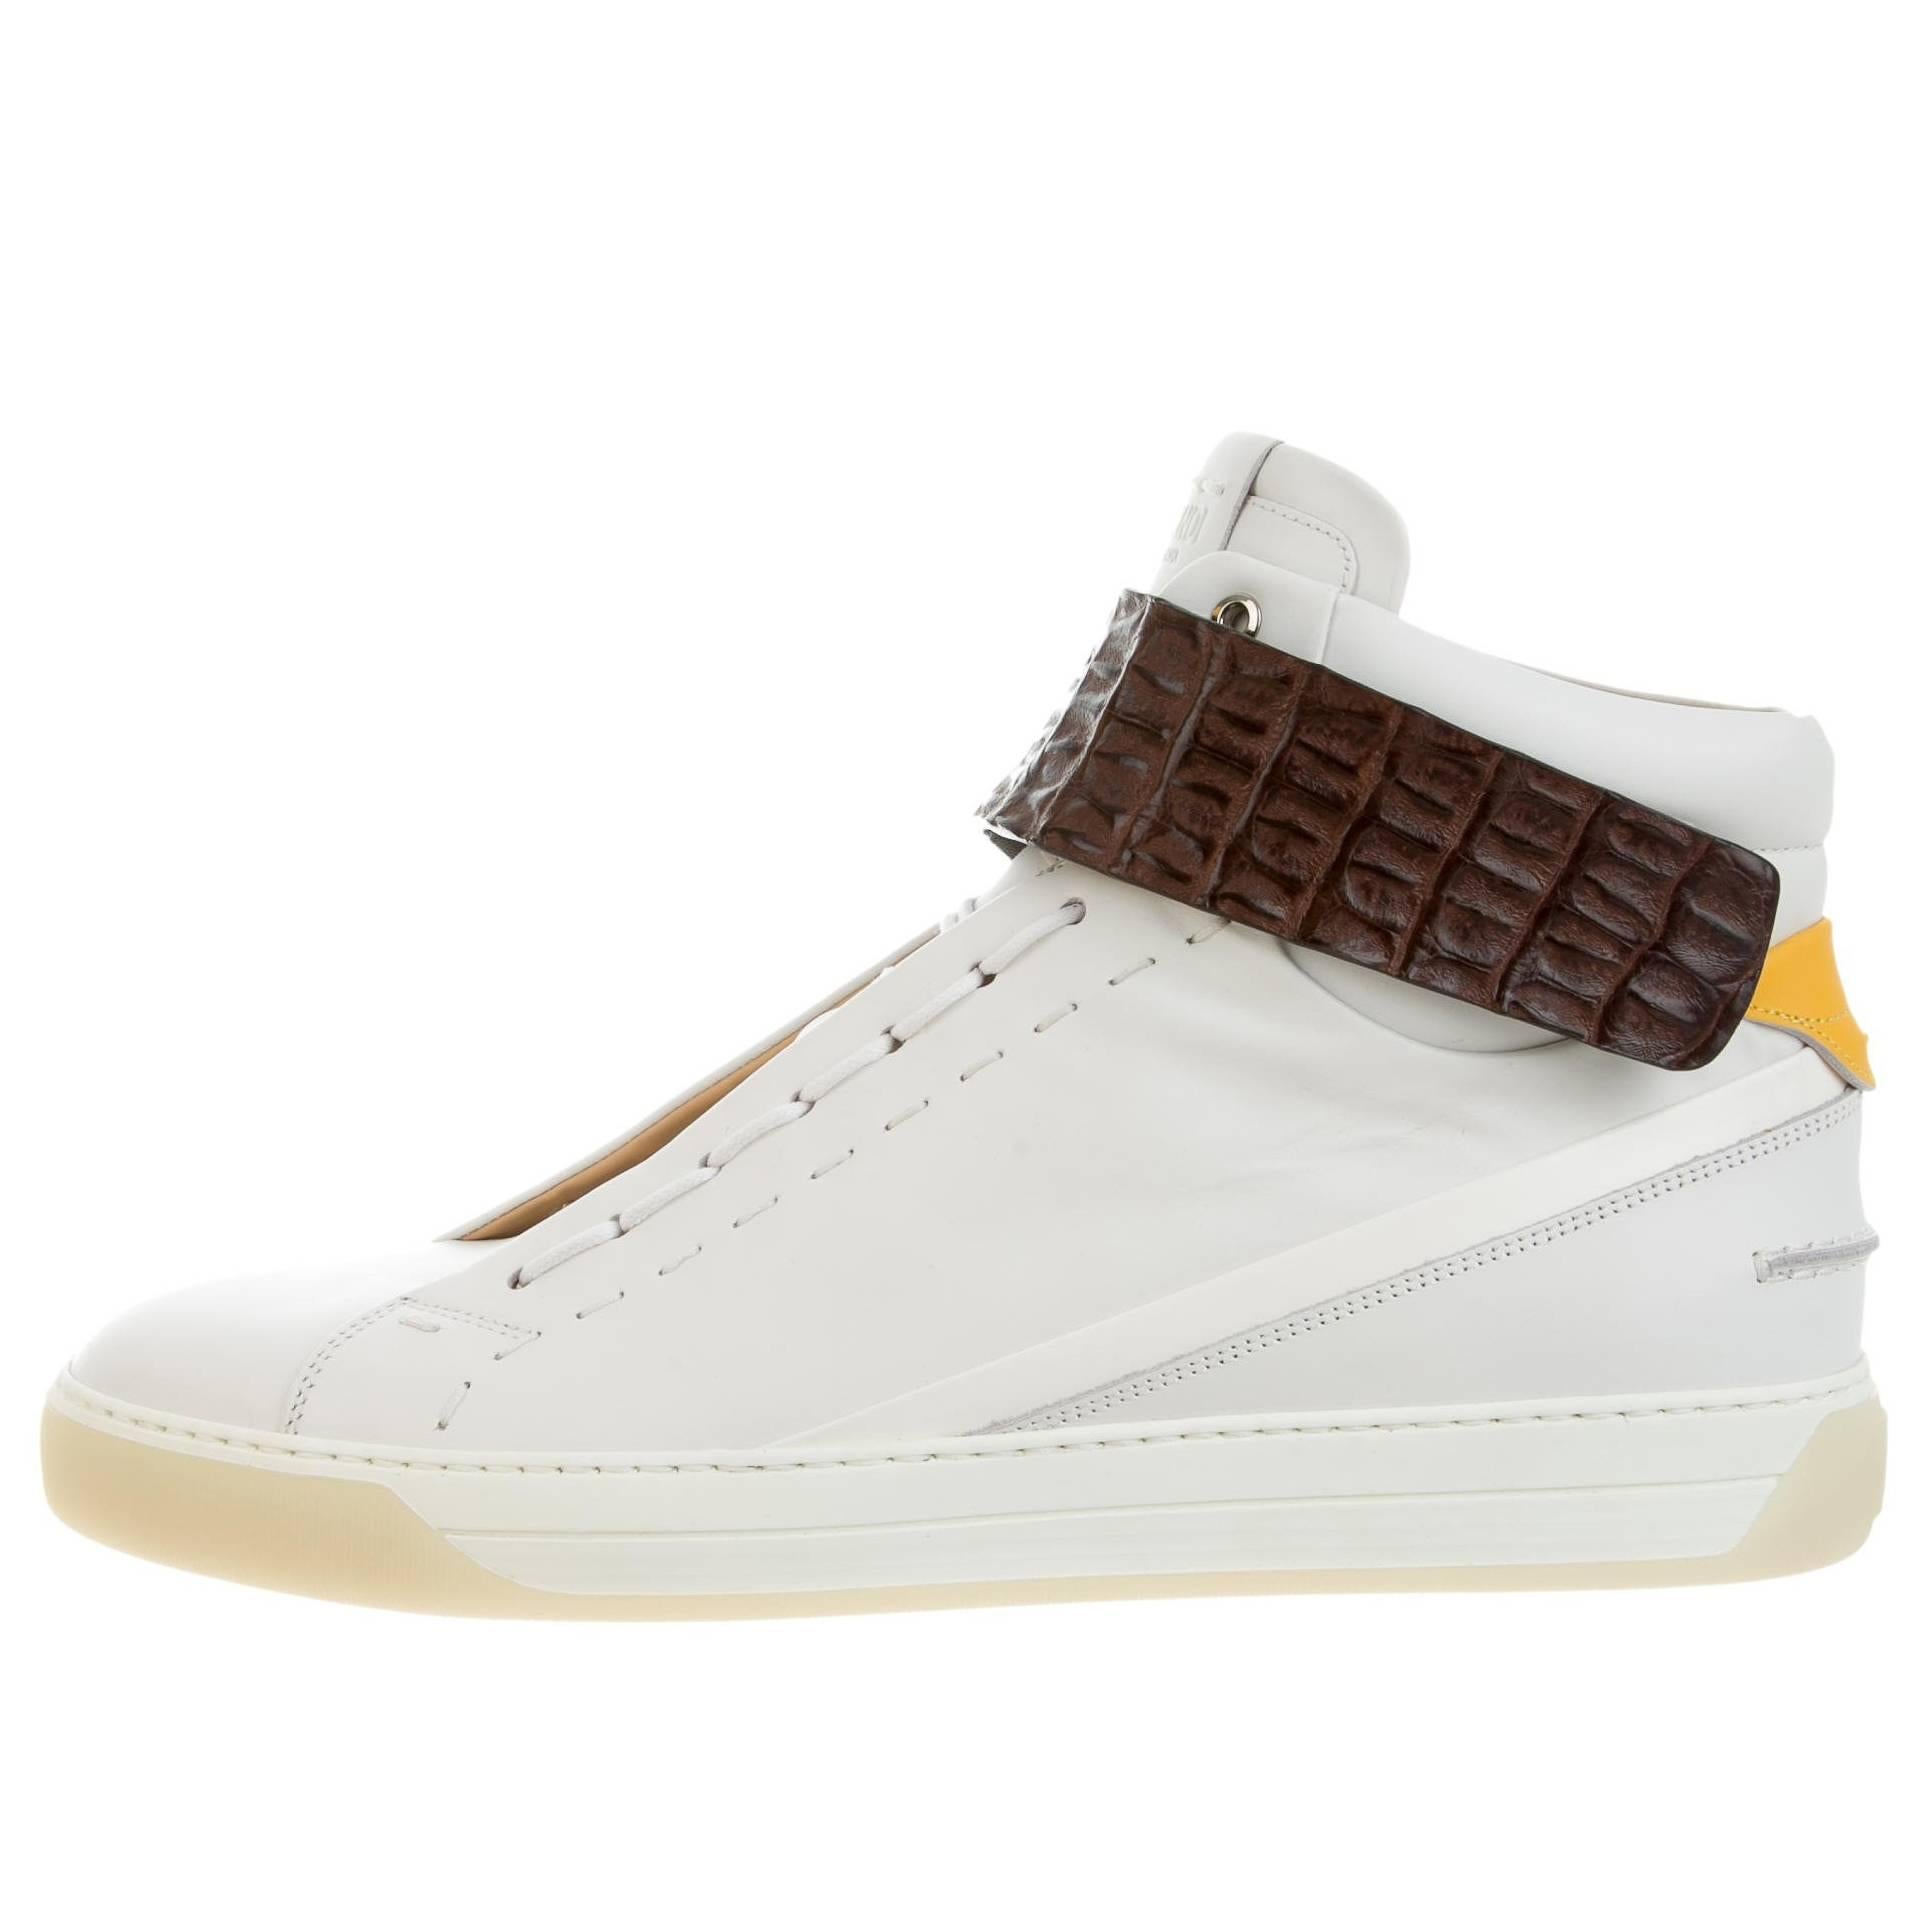 Fendi NEW Men's Limited Edition White Leather High Tops Sneakers Shoes in Box